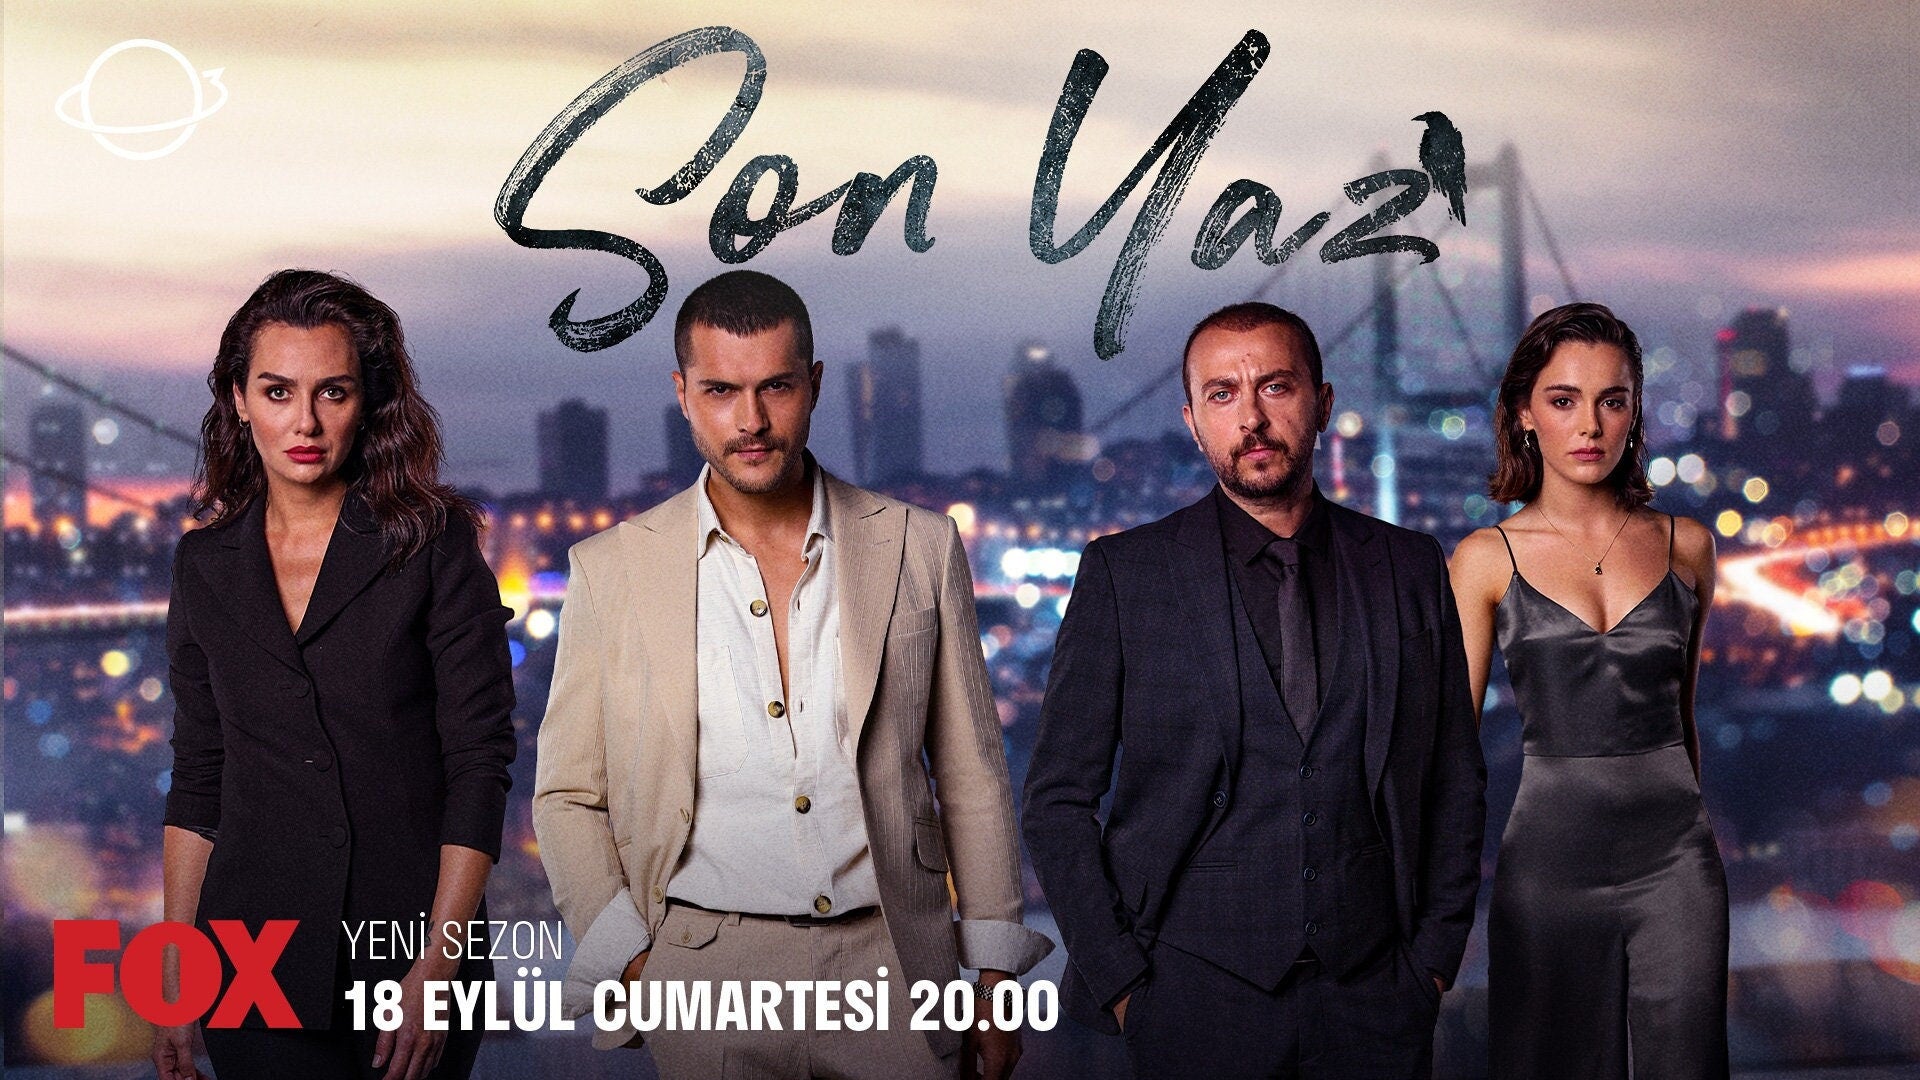 Son Yaz Last Summer English Subtitles All Episodes | Complete Turkish Tv Series in English Original Voices with Subtitles USB *No Adverts*